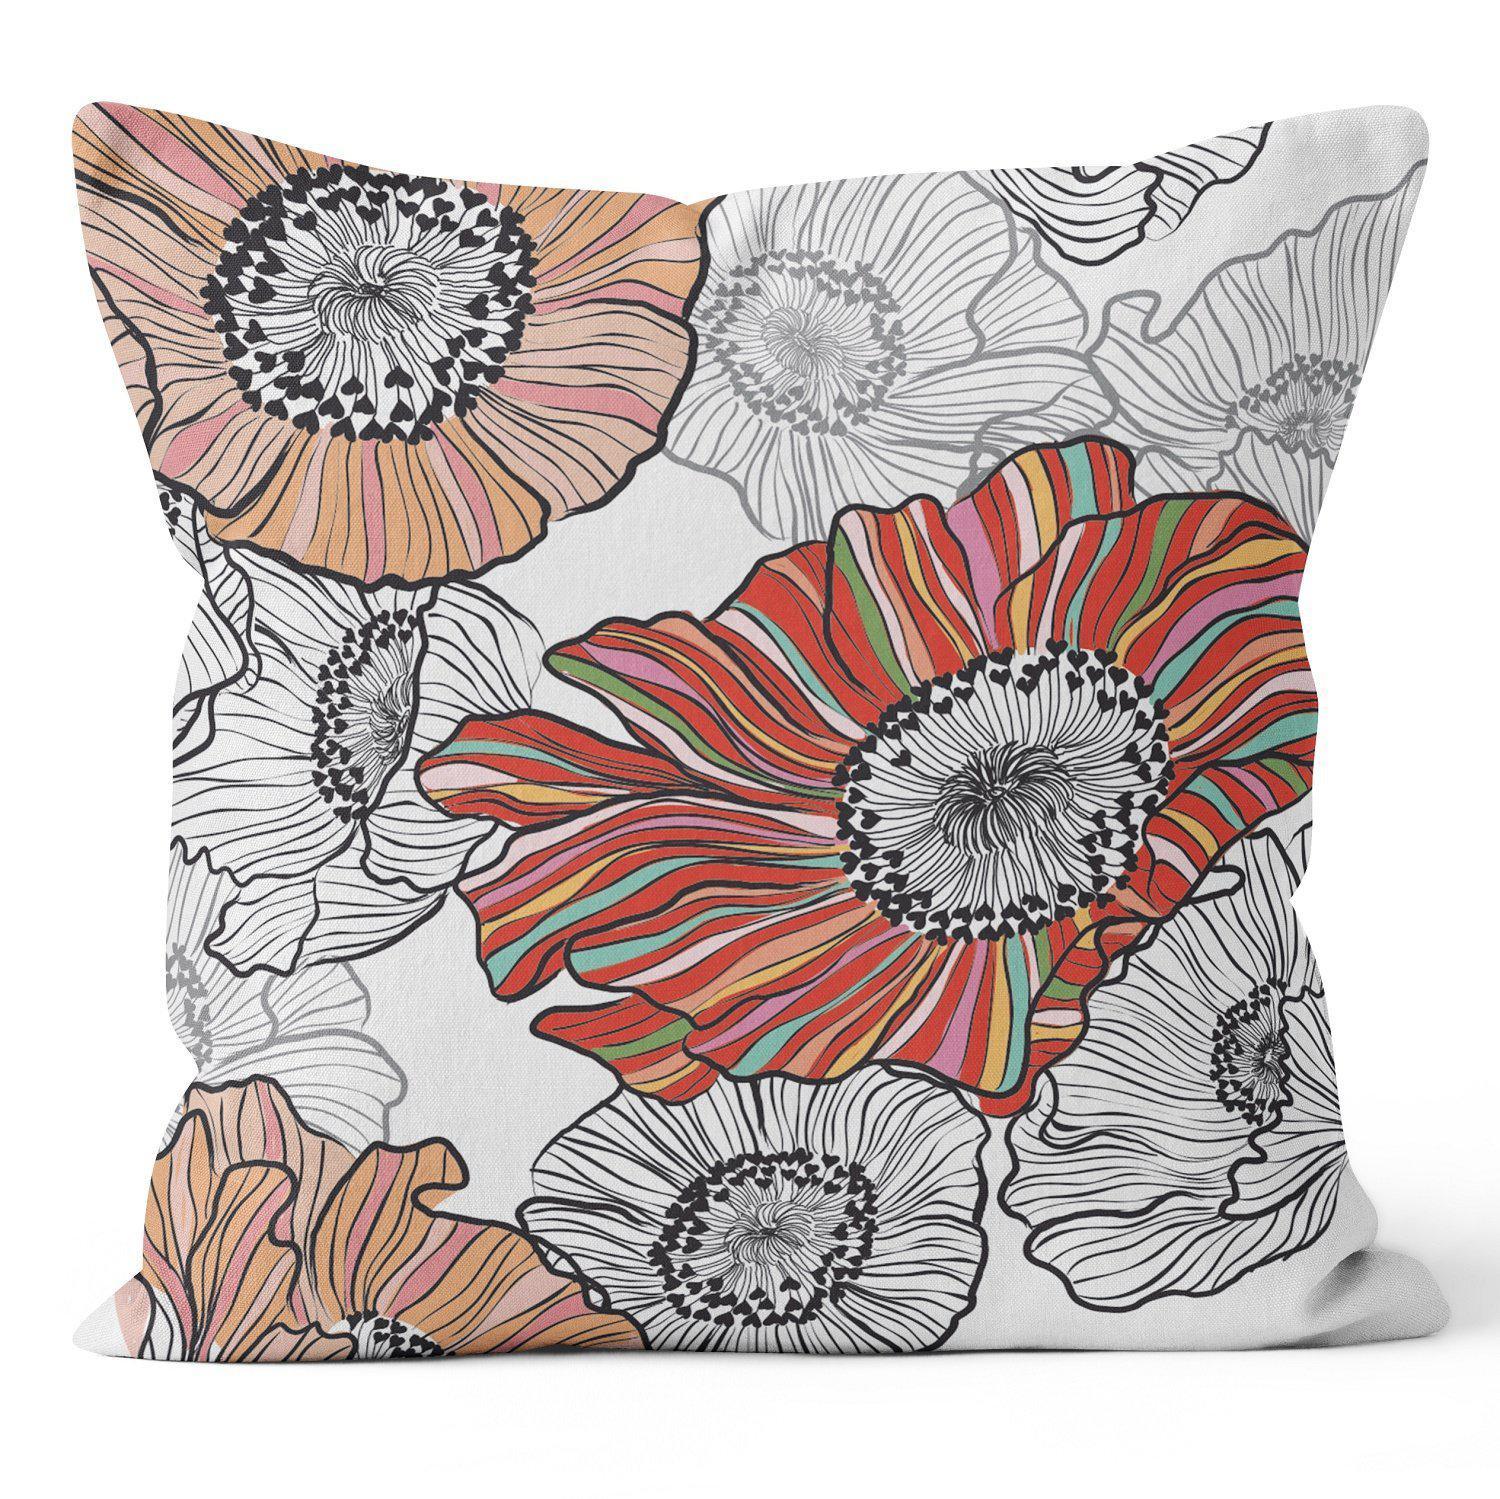 Candy Stripe Poppies (White) - Funky Art Cushion - Paradise Garden - House Of Turnowsky Pillows - Handmade Cushions UK - WeLoveCushions